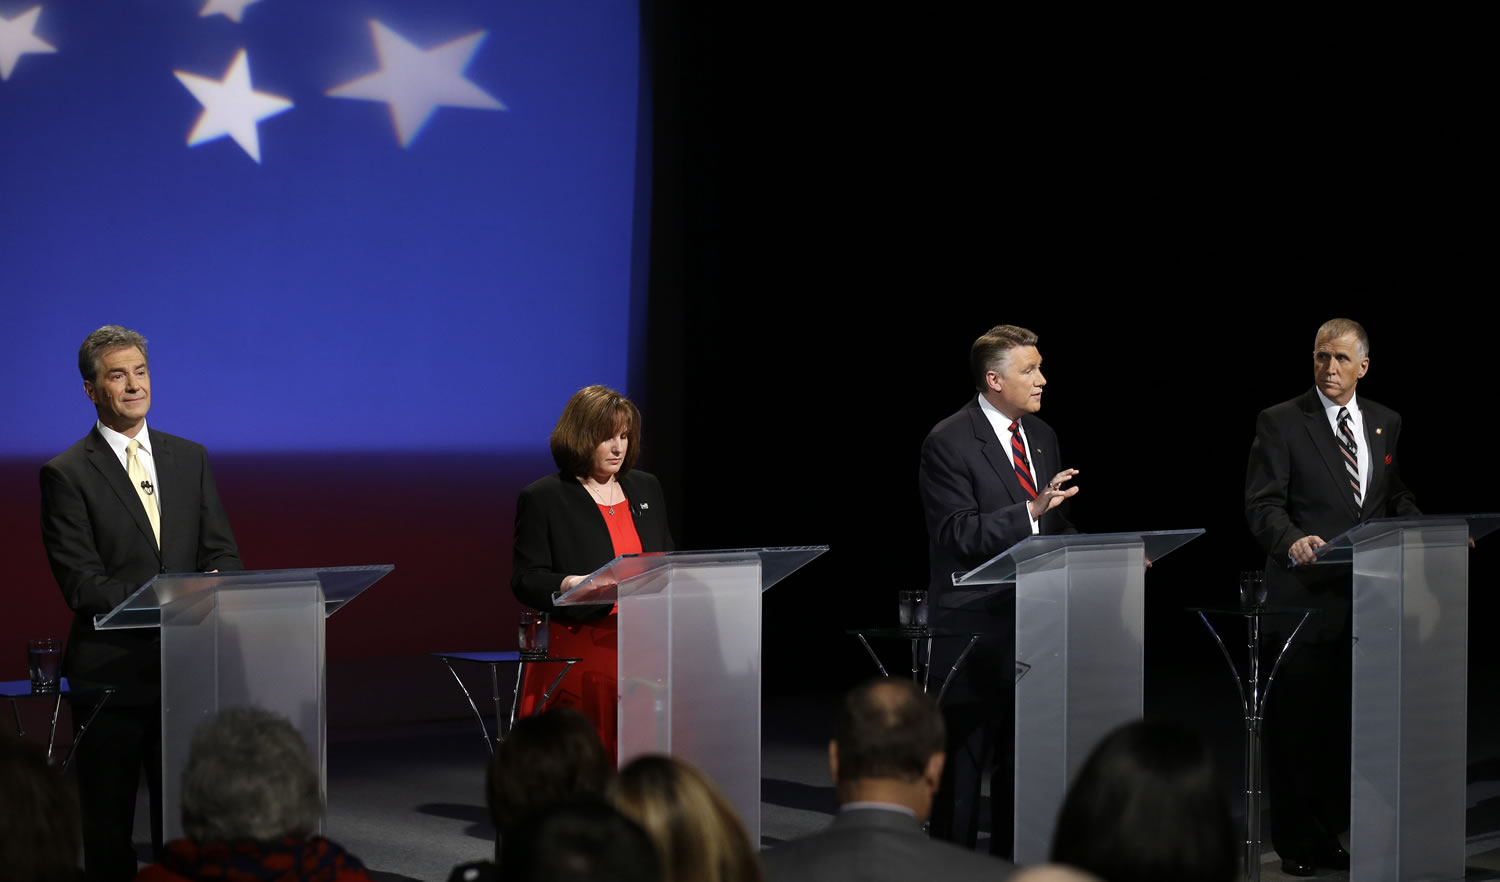 Republican senatorial candidates from left, Greg Brannon,  Heather Grant, Mark Harris and Thom Tillis participate during a televised debate at UNC-TV in Research Triangle Park, N.C., on Monday.